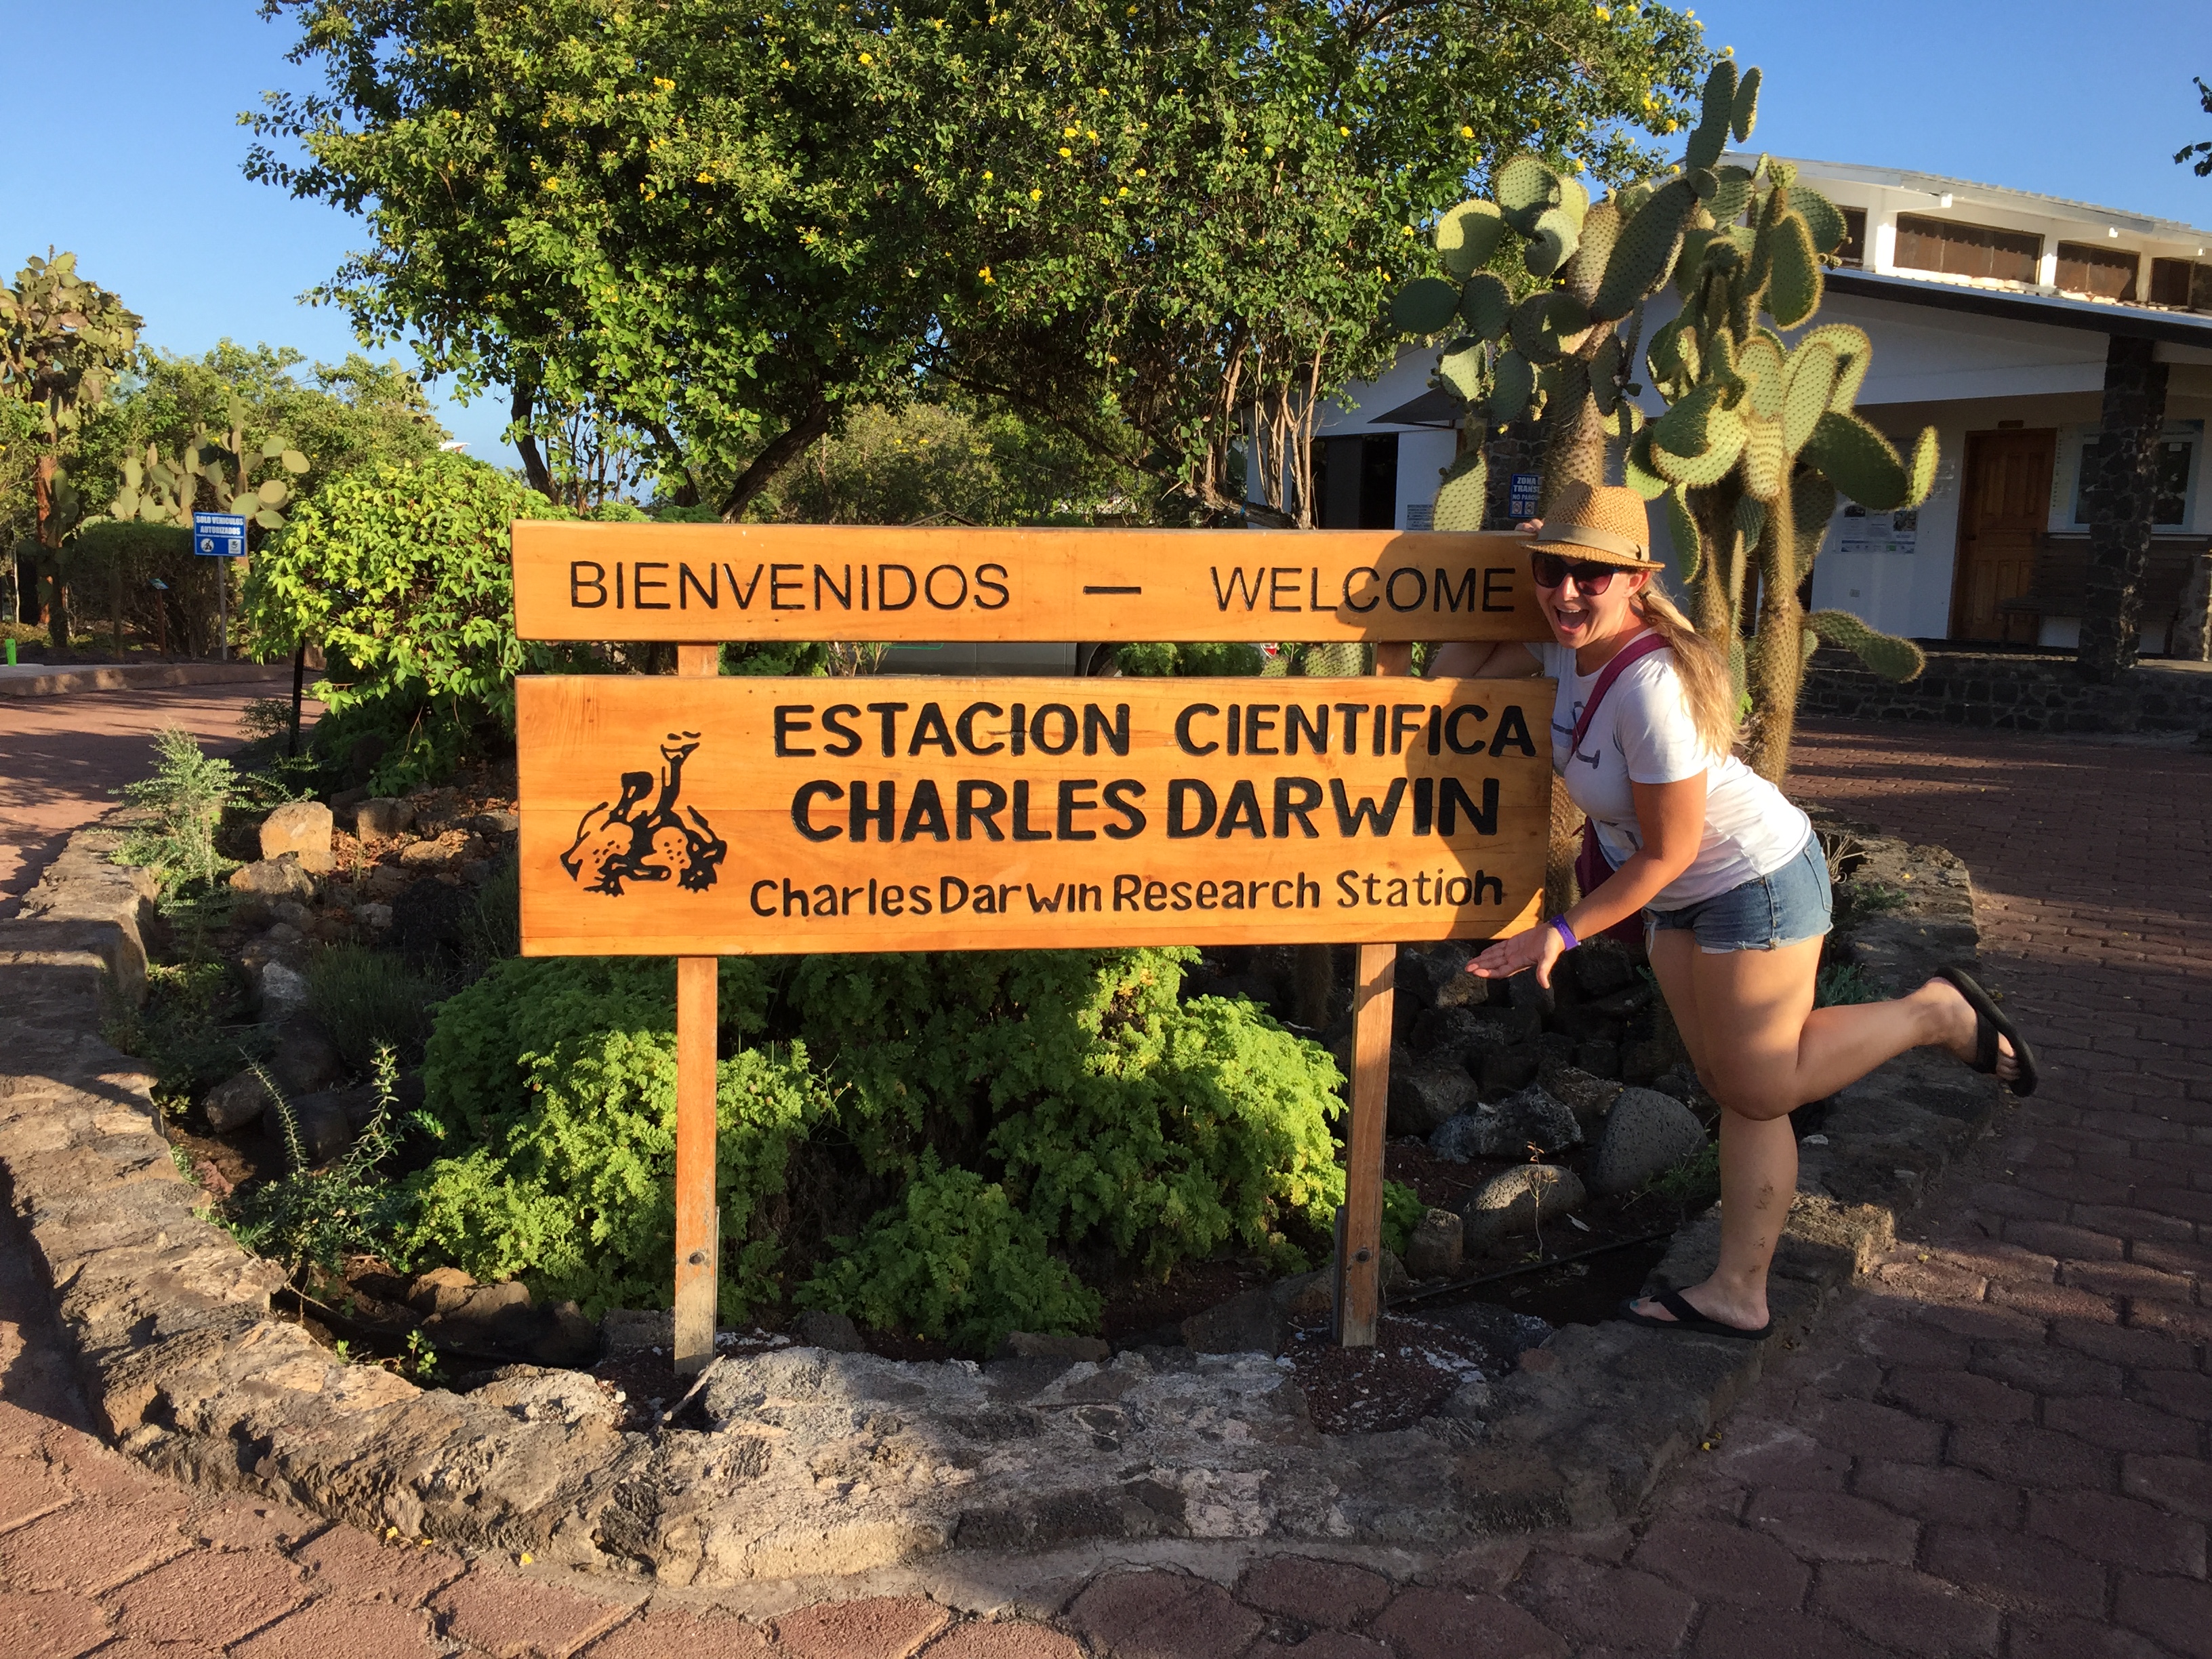 The Charles Darwin Research Station in the Galapagos Islands fulfilled some serious bucket list dreams for me.